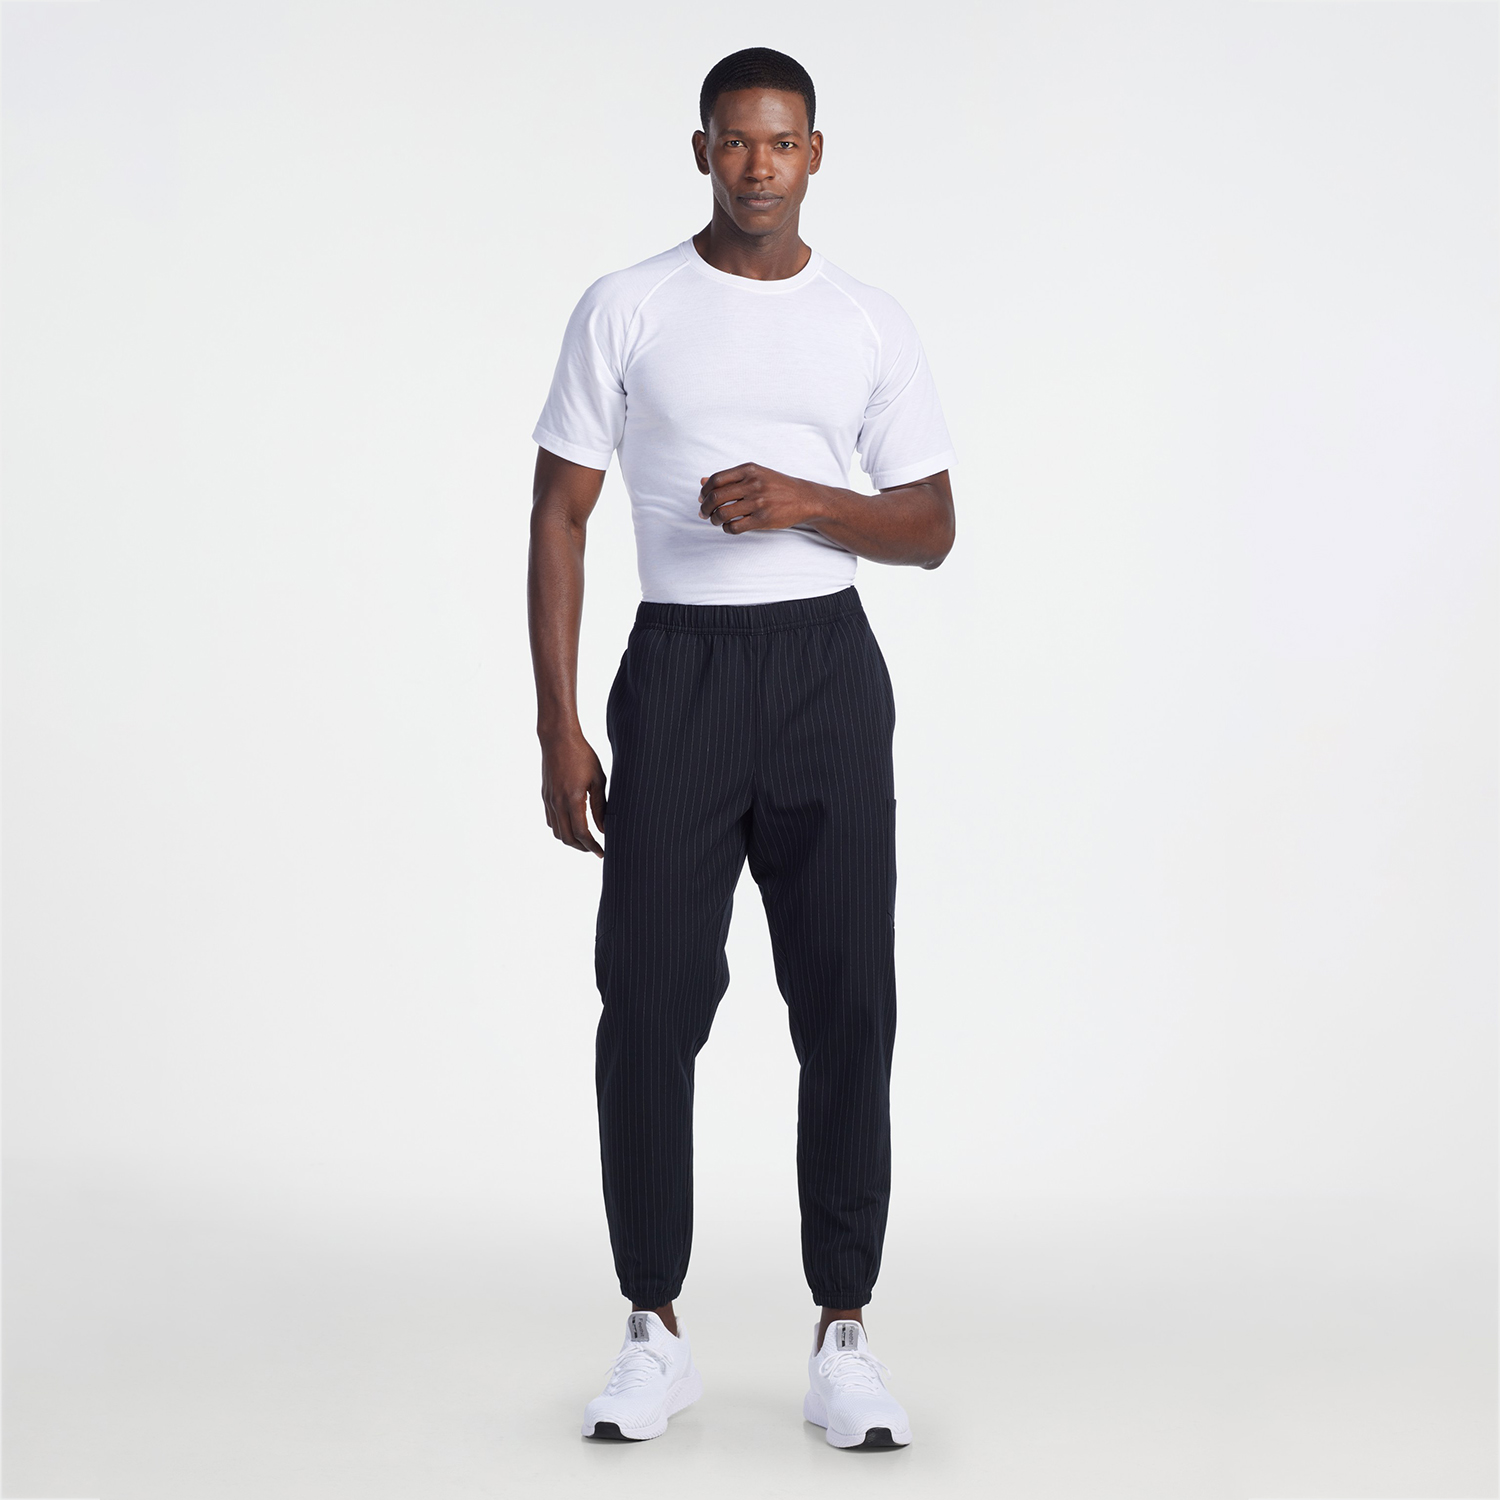 Evolve Cotton Jogger Chef Pant - On Sale | Chefwear